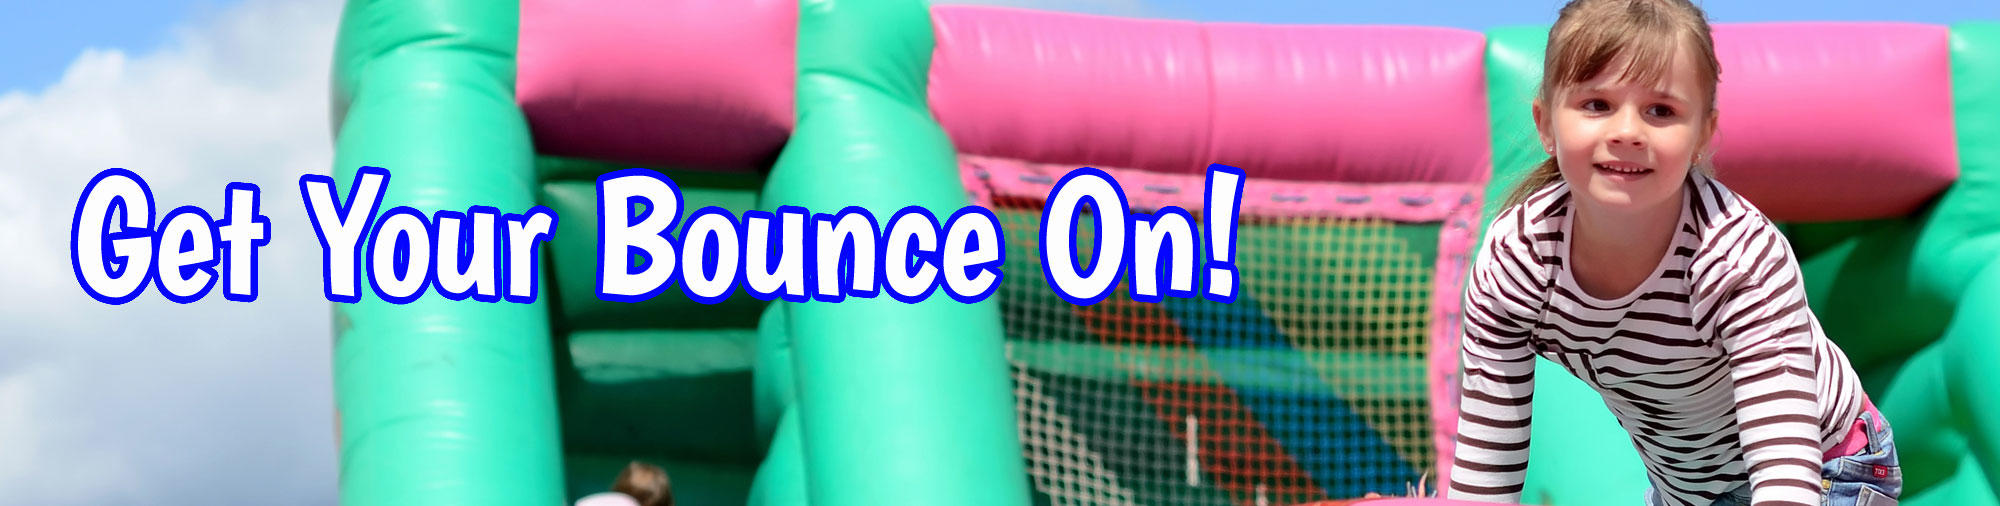 Get Your Bounce On